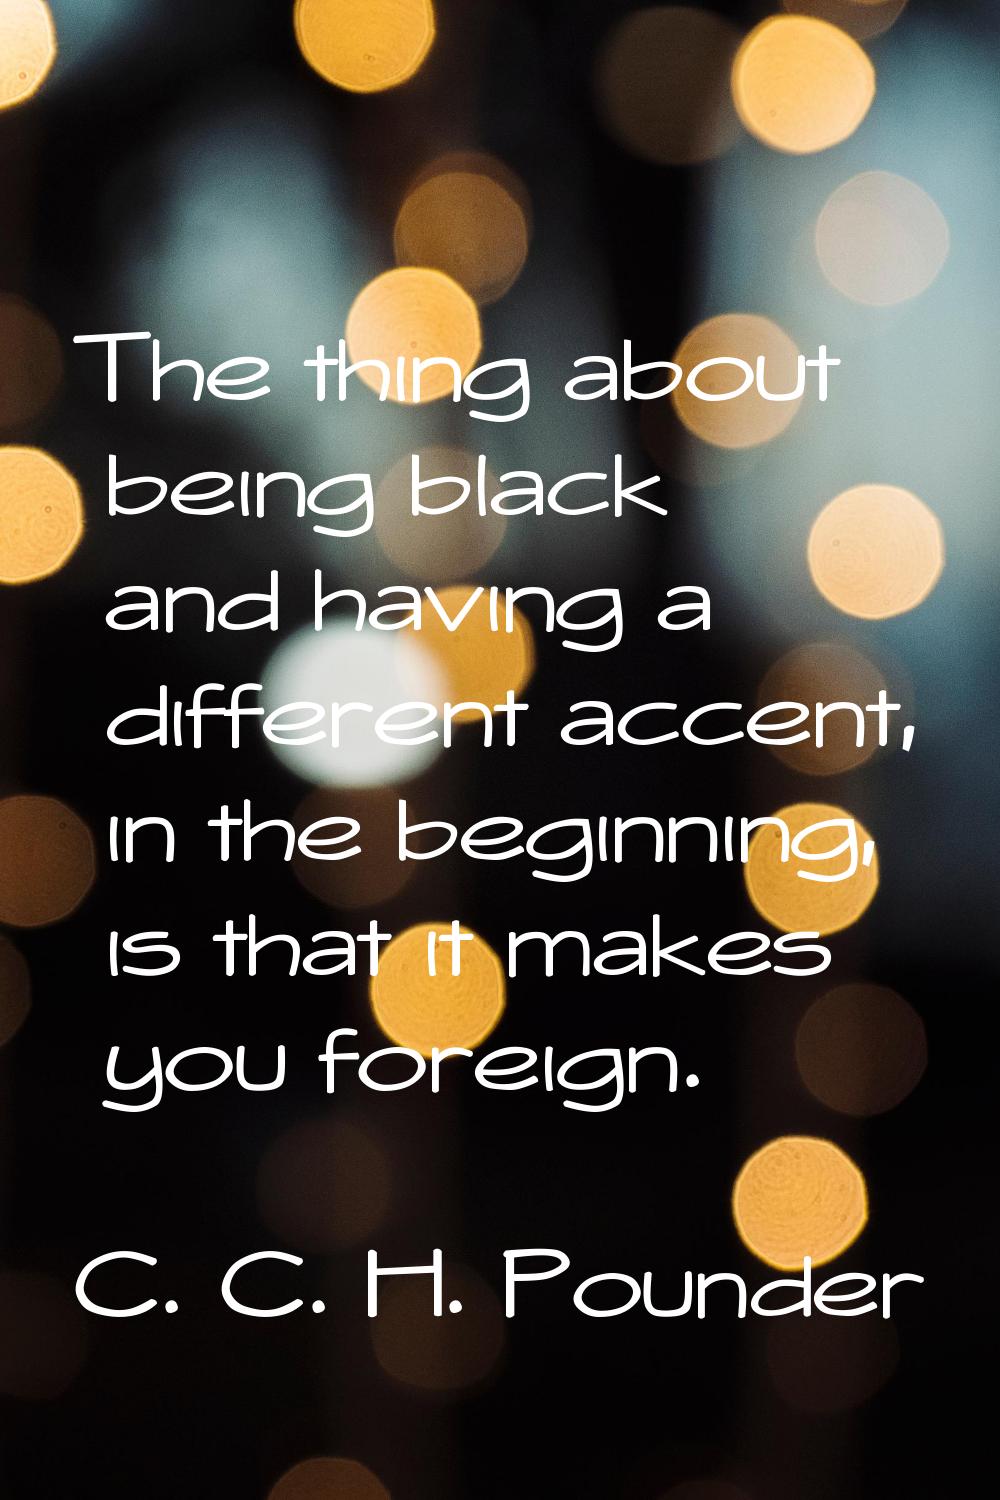 The thing about being black and having a different accent, in the beginning, is that it makes you f